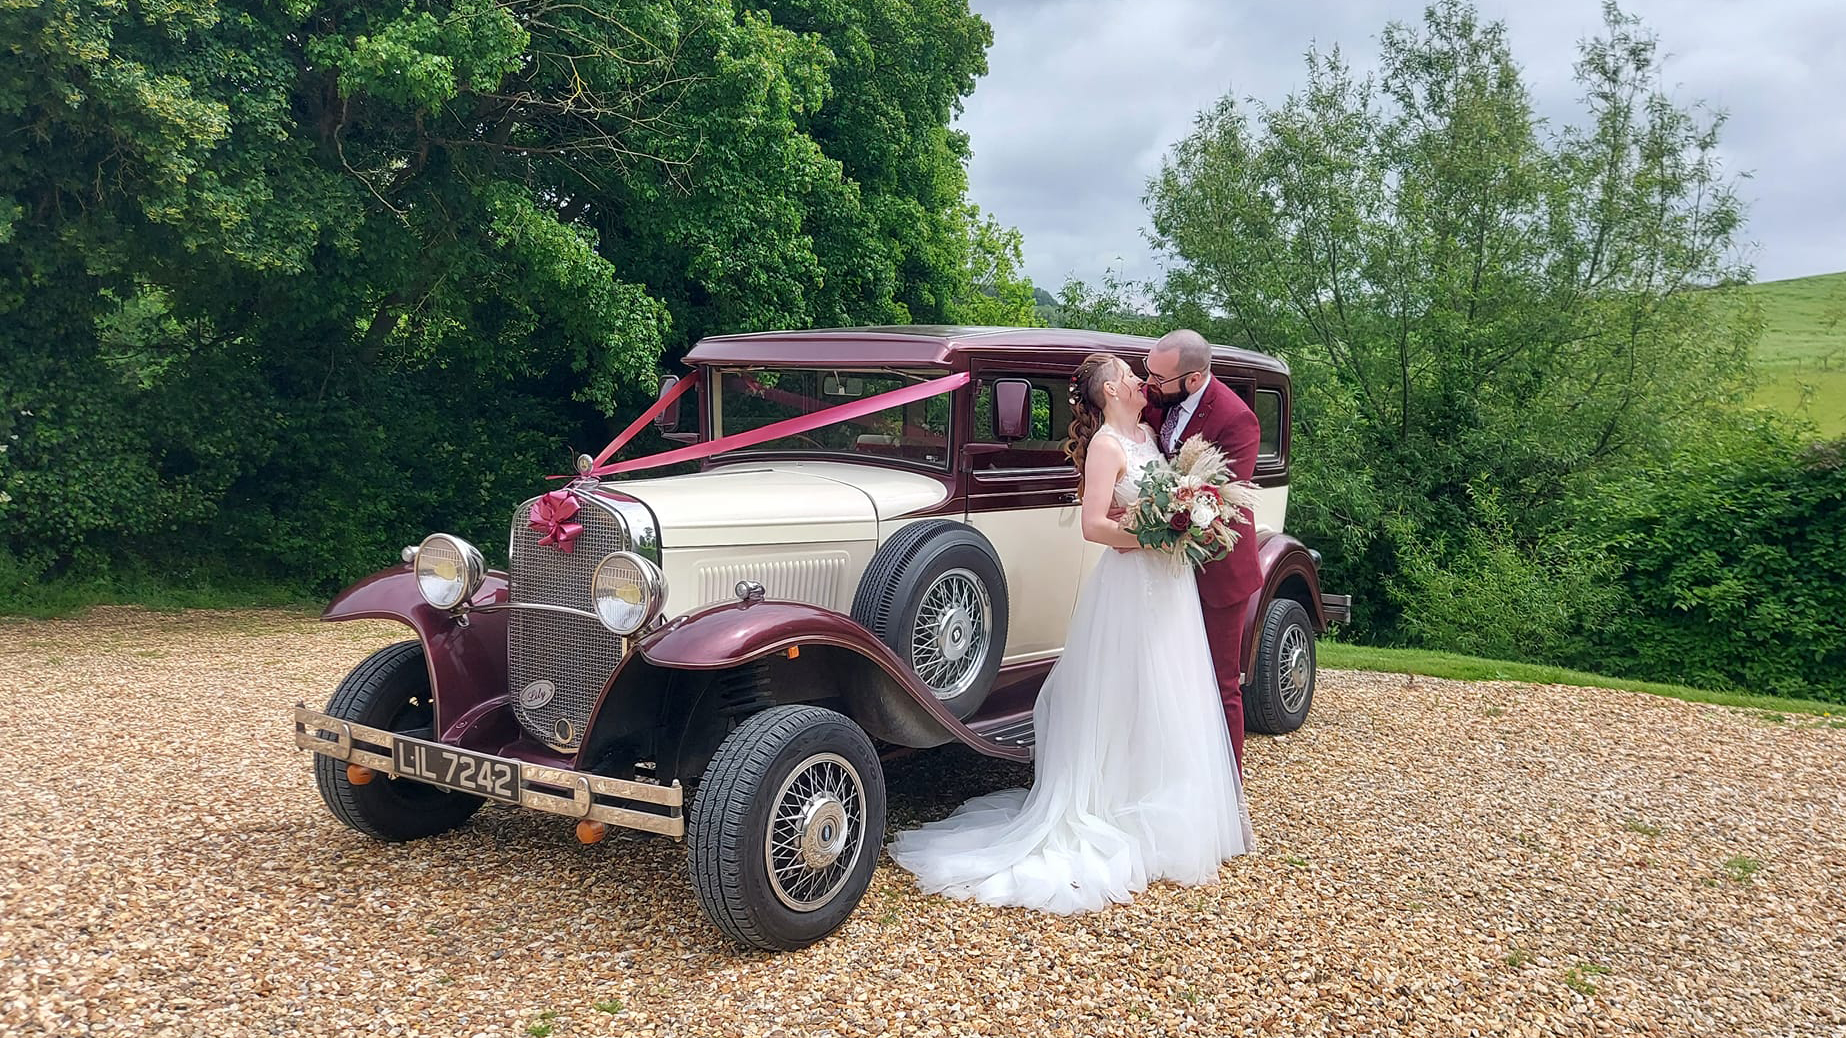 Bramwith Limousine in Ivory and Burgundy dressed with white ribbons with Bride and Groom standing in front of the vehicle kissing.